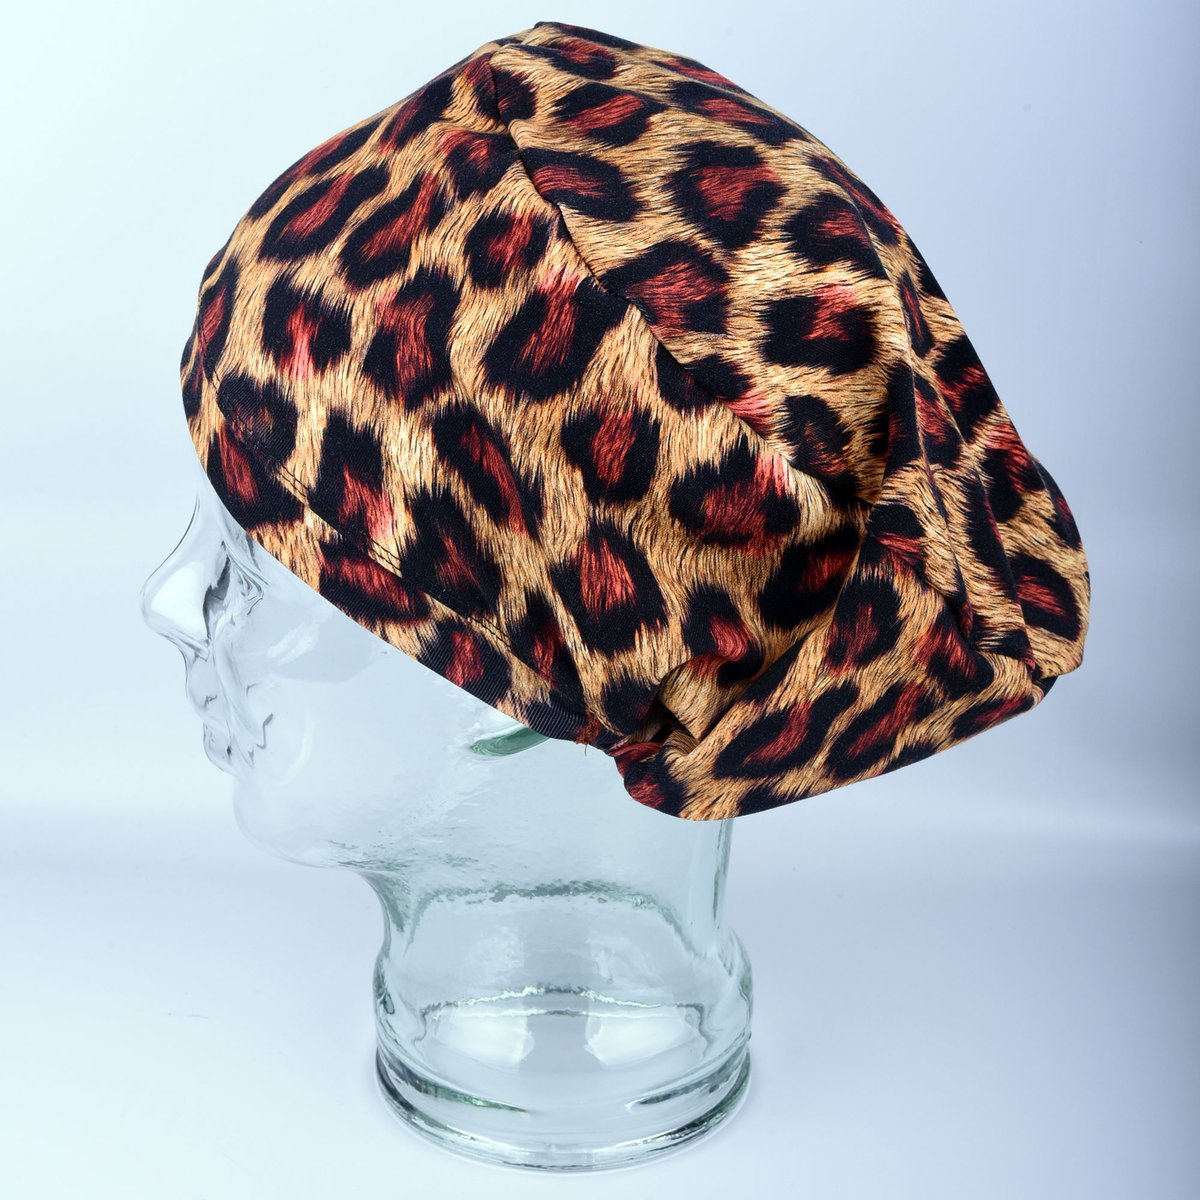 Back in Stock! Cheetah Scrub Cap. Full Coverage Style. Made of super soft, super stretchy custom luxury cotton fabrics for ultimate comfort.

#peds #pedsnurse #pedsnurses #pediatrics #pediatricnurse #pediatricsurgery #childrenshospital #scrubcaphats #newnurse #medstudent